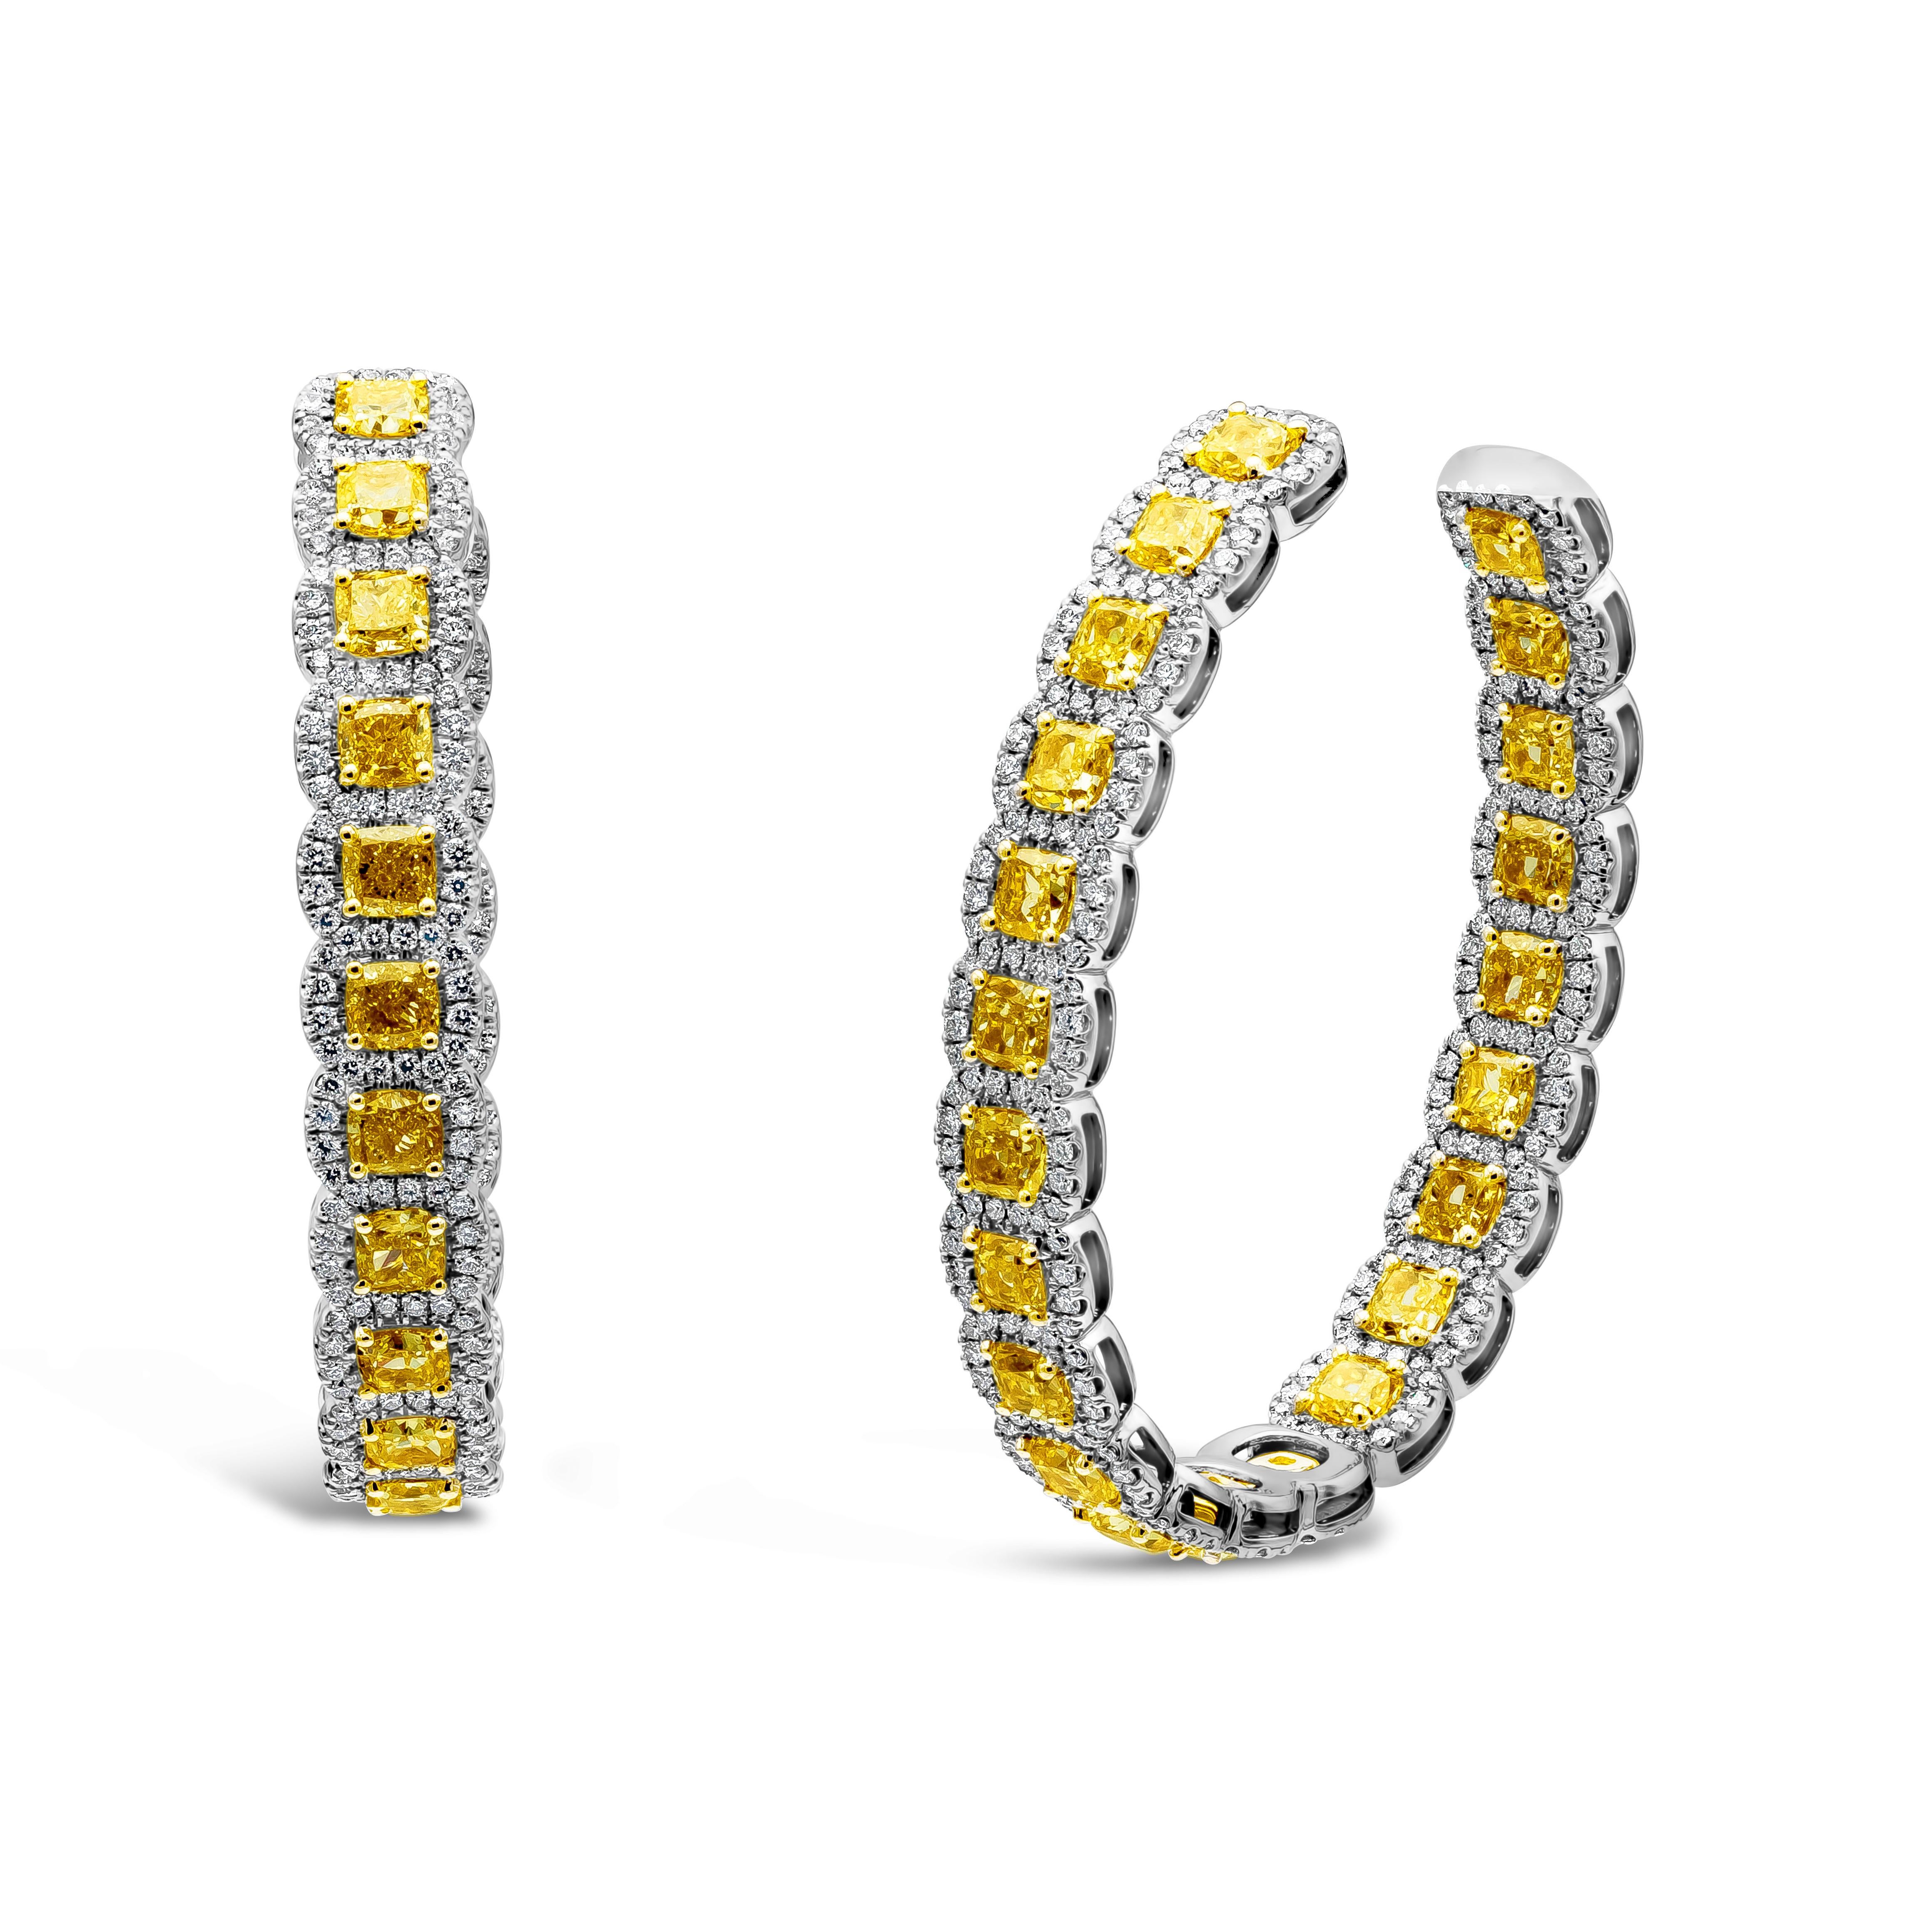 A unique and fashionably gorgeous Radiant Cut Yellow Diamonds weighing 15.28 carat, surrounded by dazzling white diamonds weighing 3.69 carats. Diamonds are F color and VS/SI in Clarity. Set in solid 18 karat white gold.

2 inch length by 1.50 inch